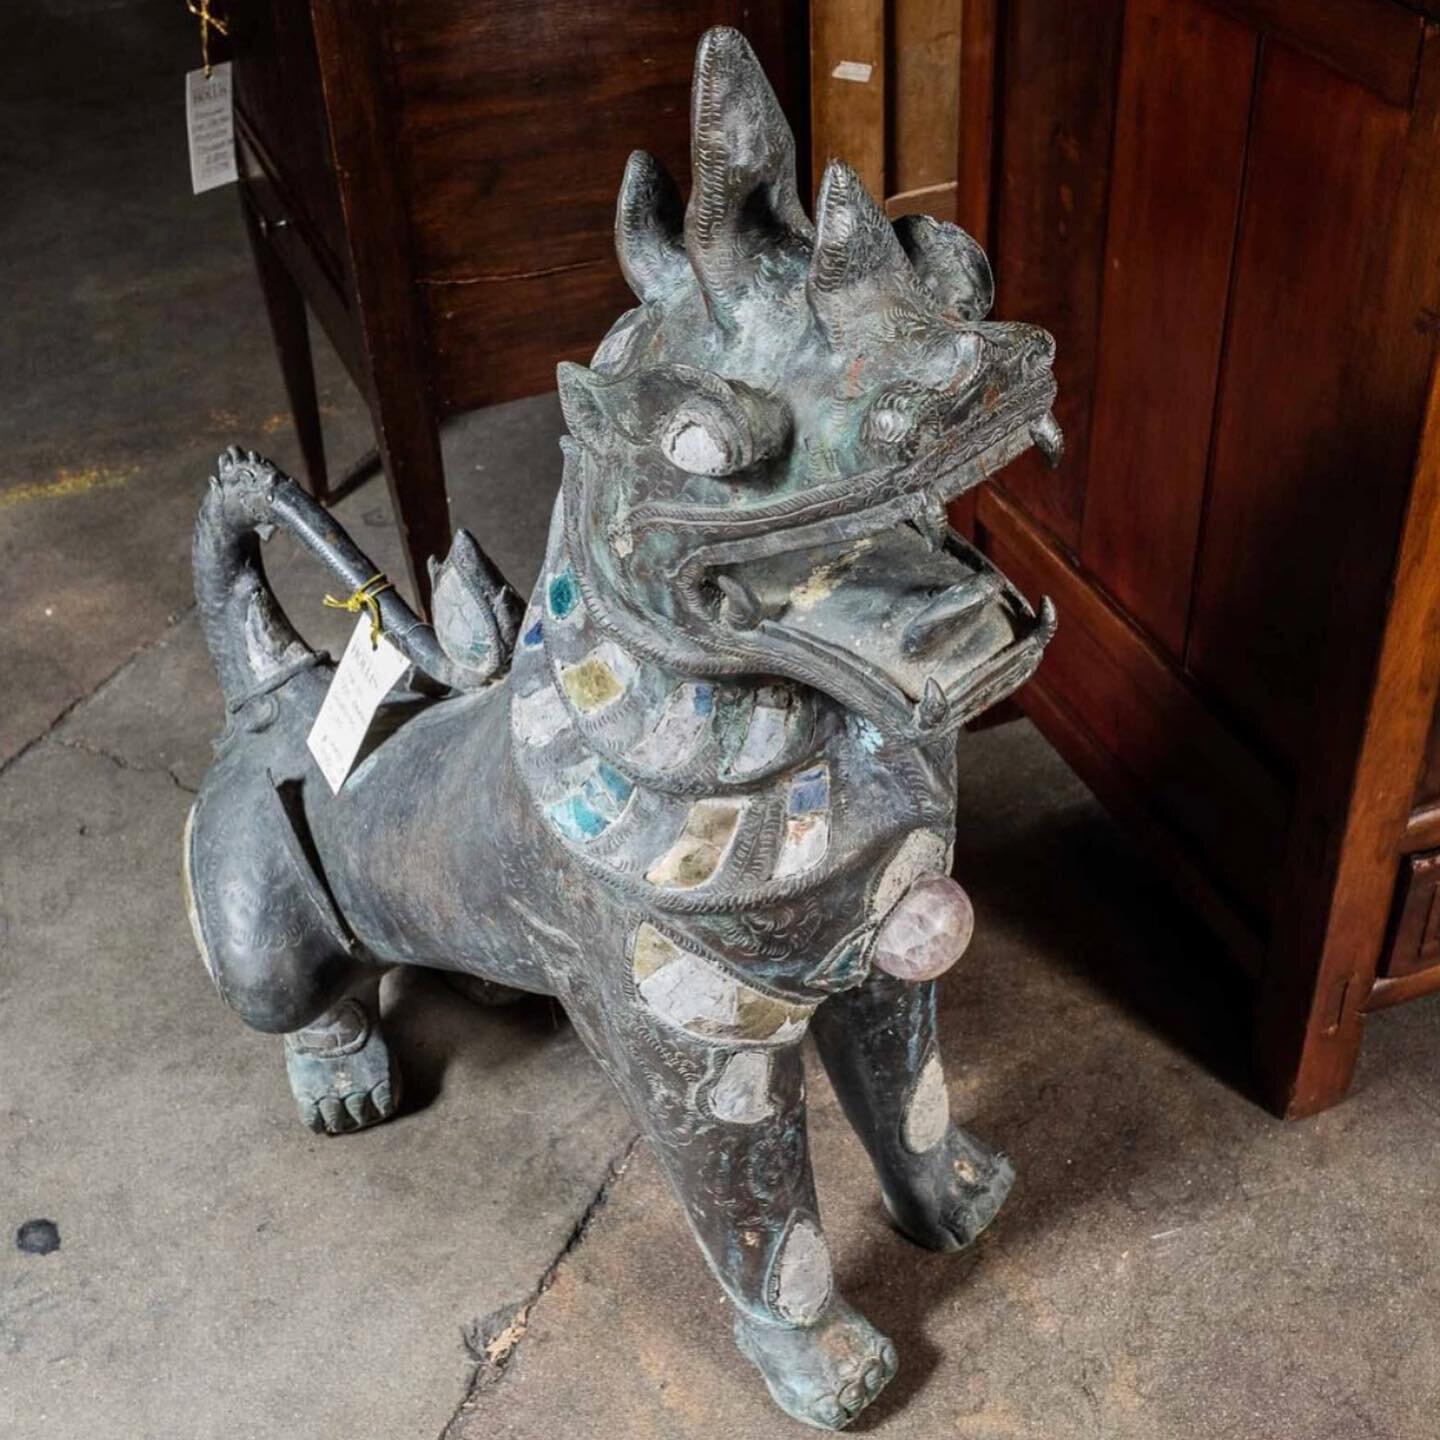 A stunning pair of Thai Guardian Lions are here to greet you at our #interiordesigner warehouse sale! 60% off too! Open until 4pm! 👉 #linkinbio 👈
.
.
.
#asiandecor #interiordesign #estatesales #estatesaleshopping #estatesale #estatesalefinds #pasad